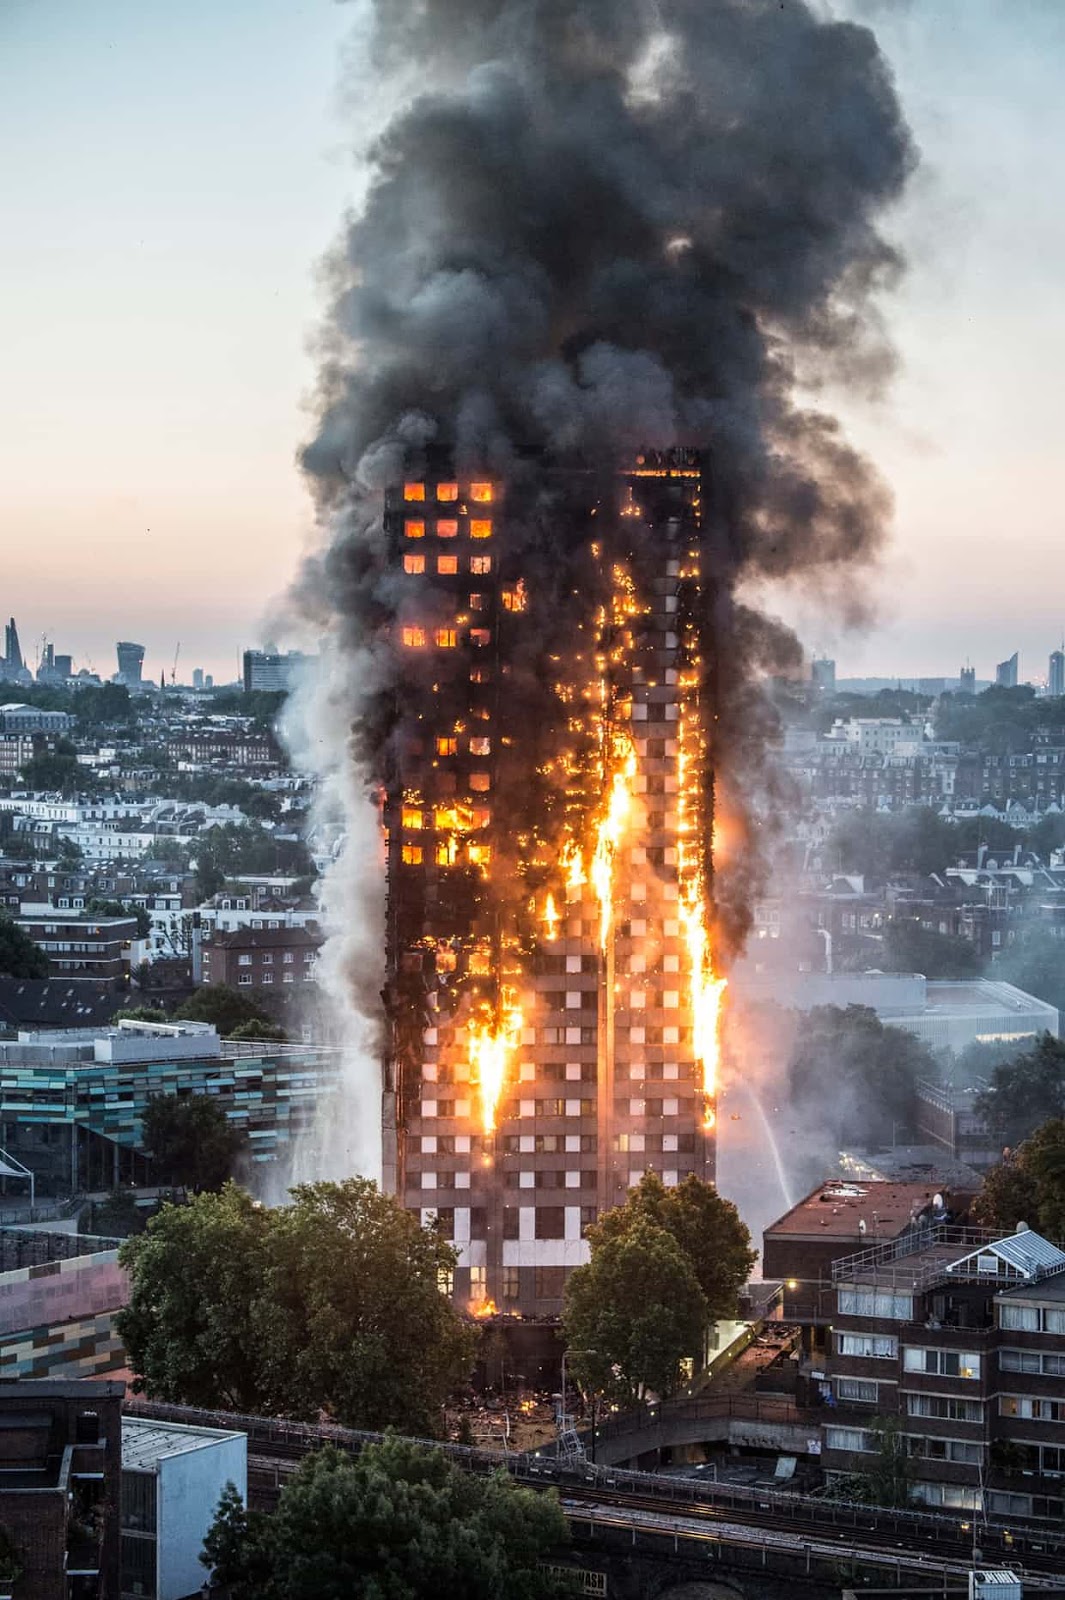 25 Of The Most Intriguing Pictures Of 2017 - A blaze engulfs Grenfell Tower in Notting Hill